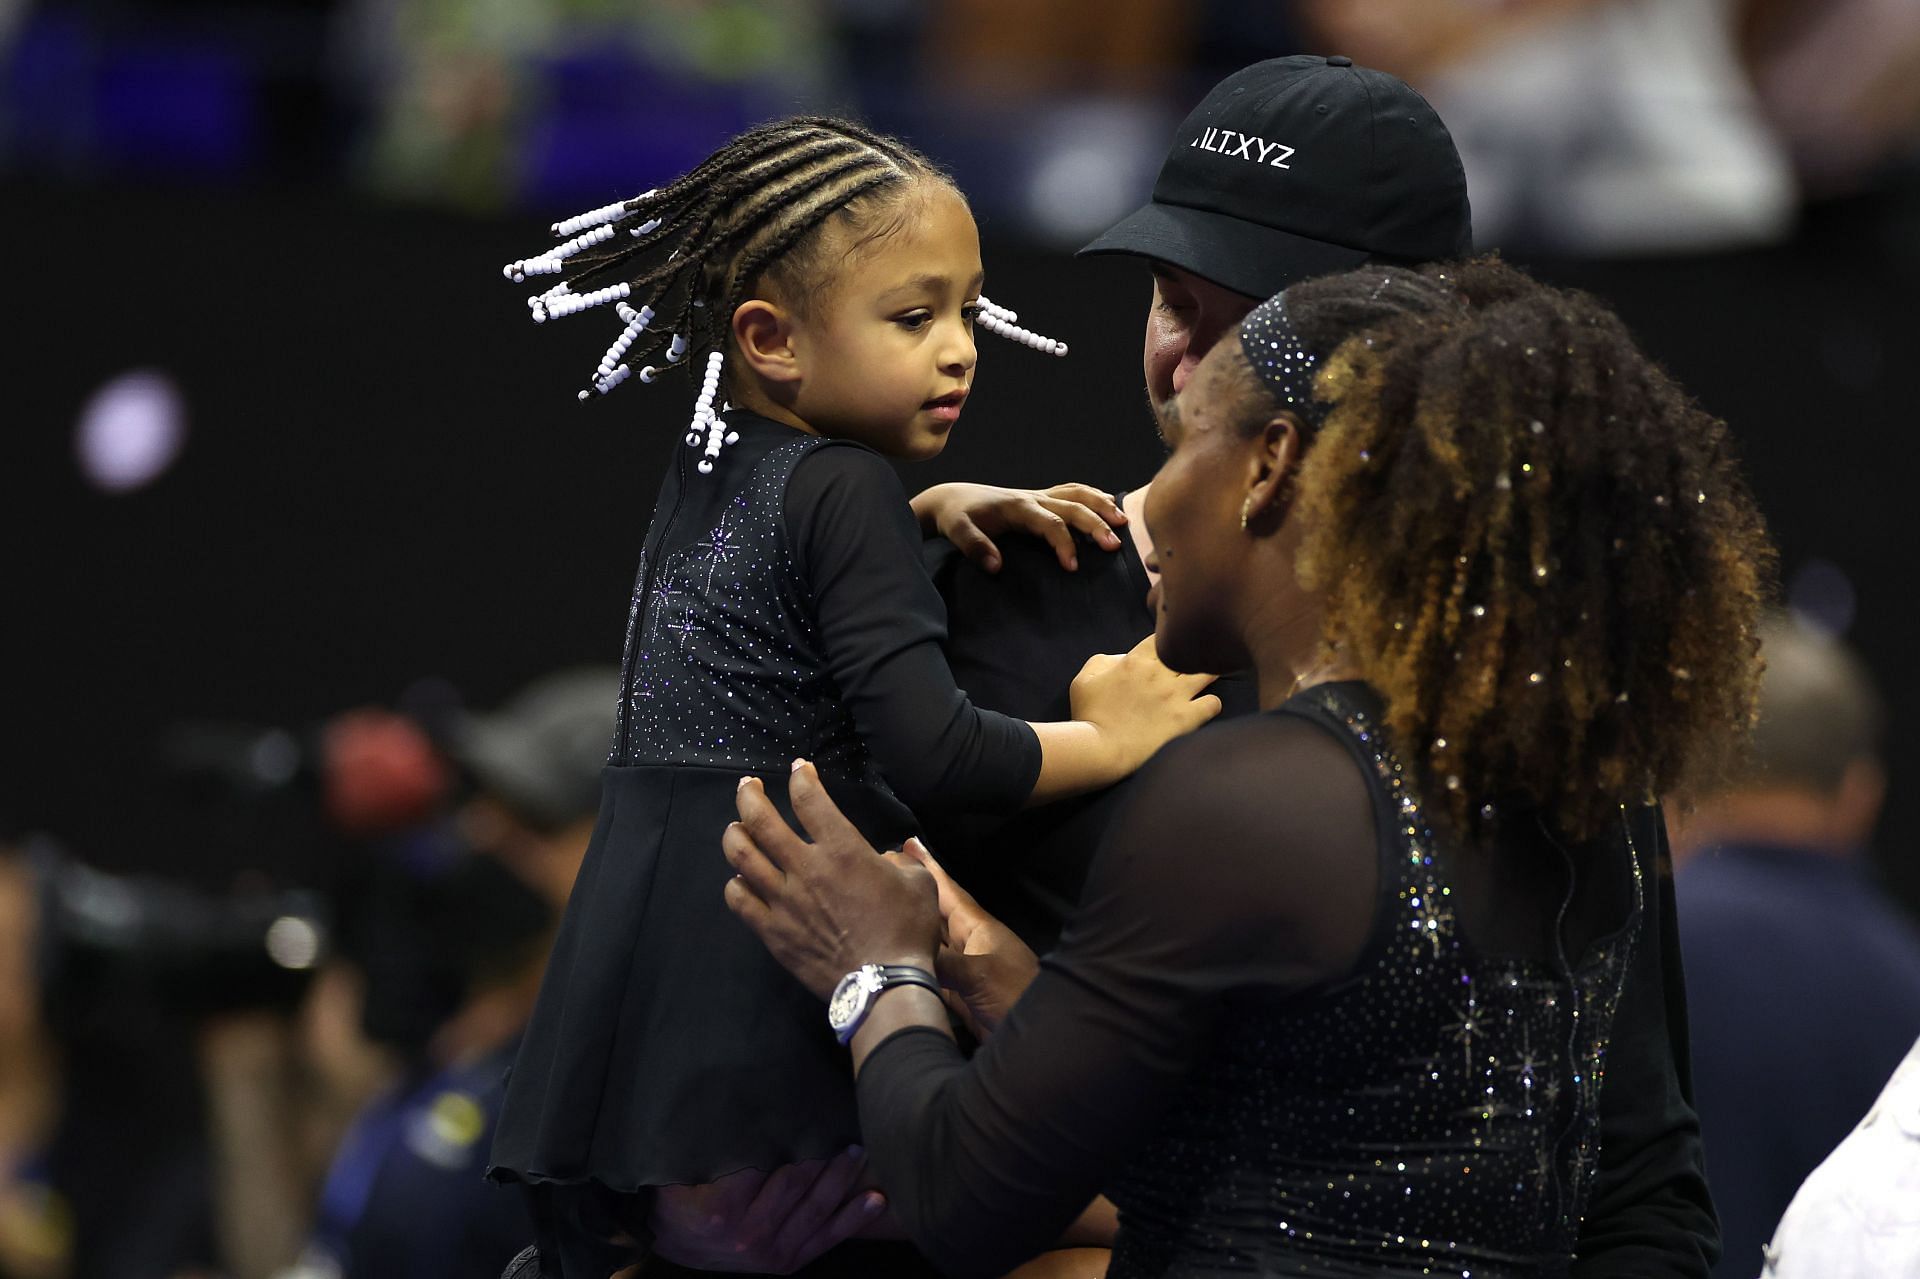 Serena Willams pictured with her family at the 2022 US Open